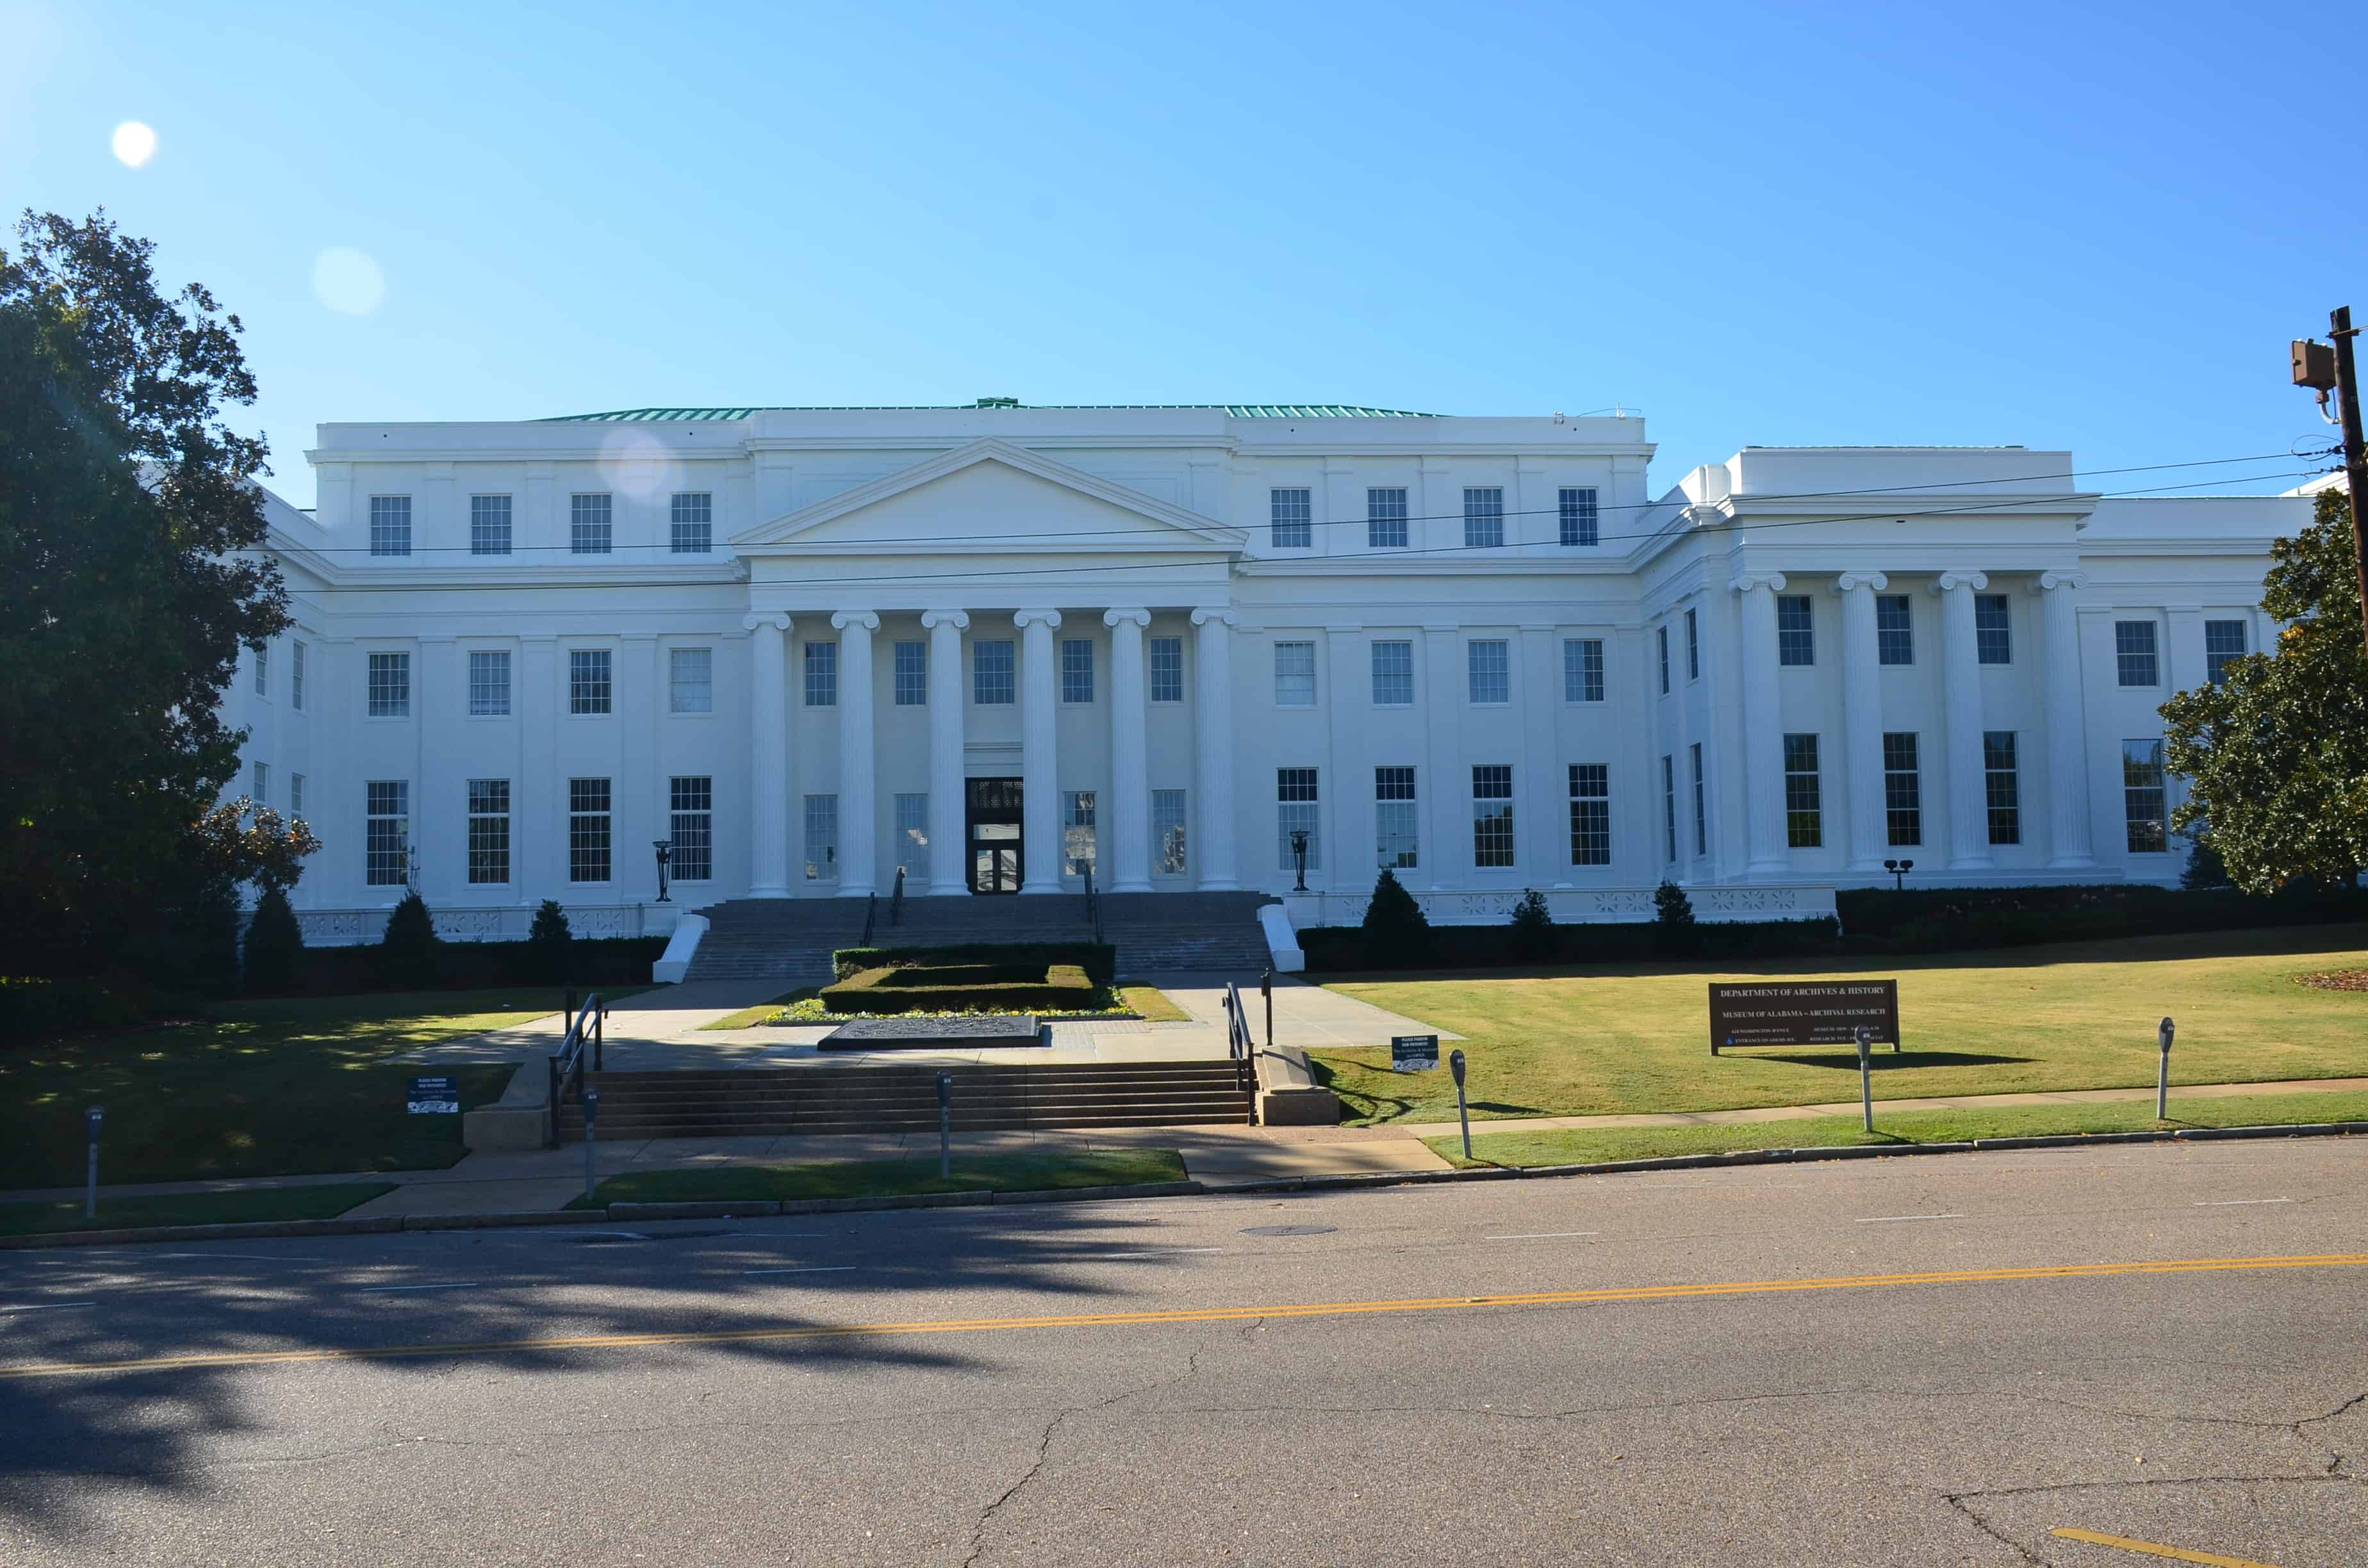 Alabama Department of Archives and History / Museum of Alabama in Montgomery, Alabama